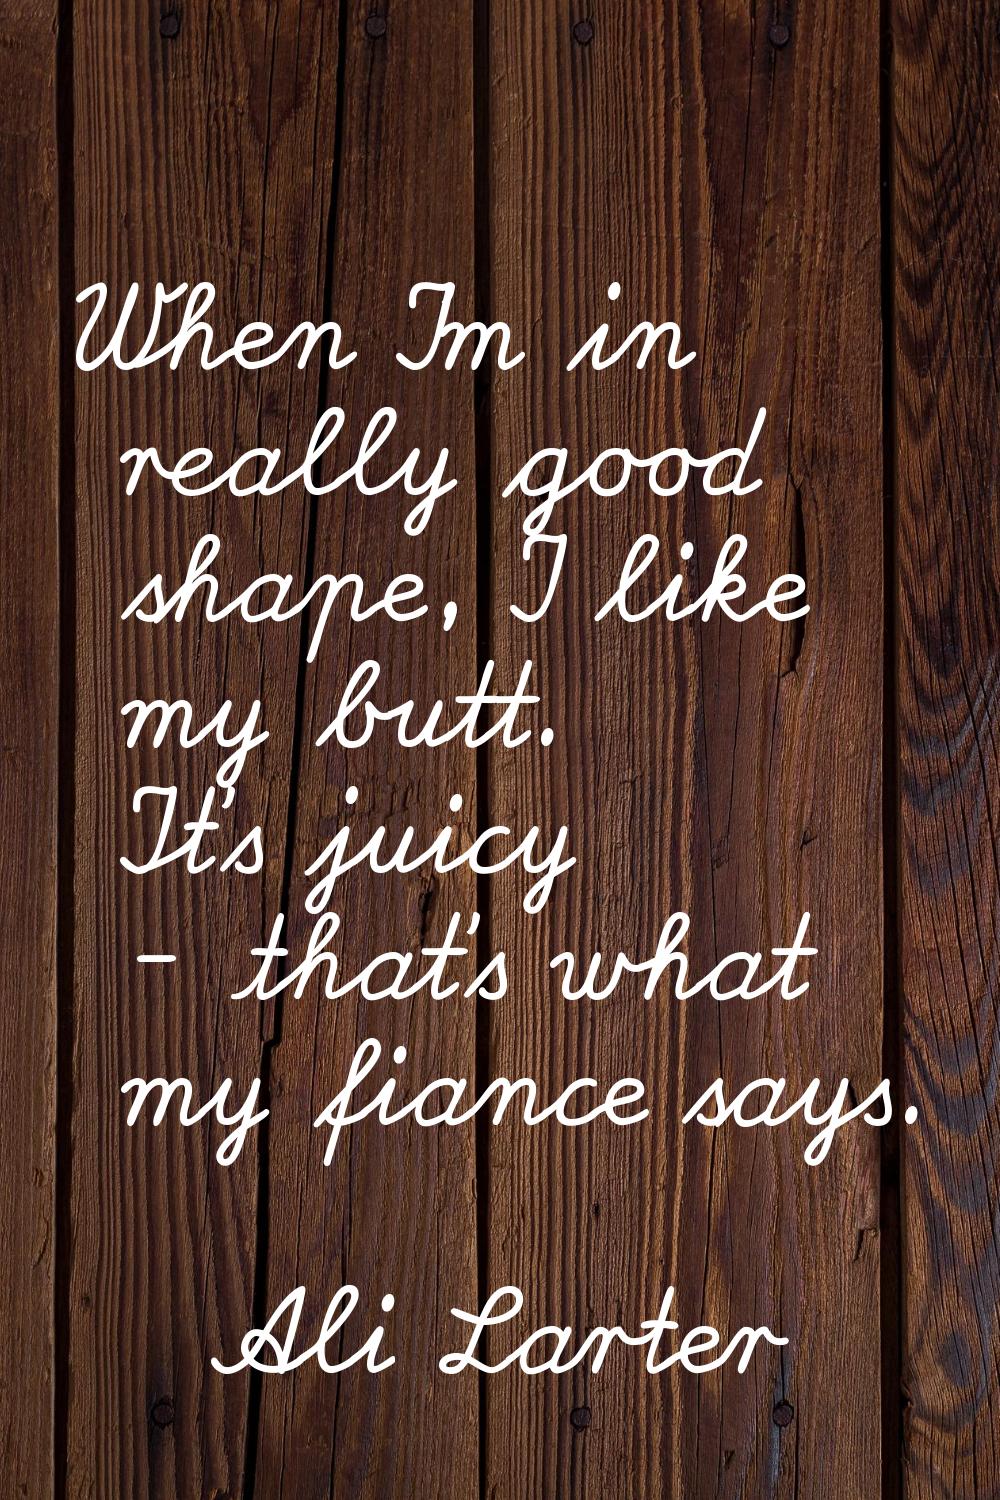 When I'm in really good shape, I like my butt. It's juicy - that's what my fiance says.